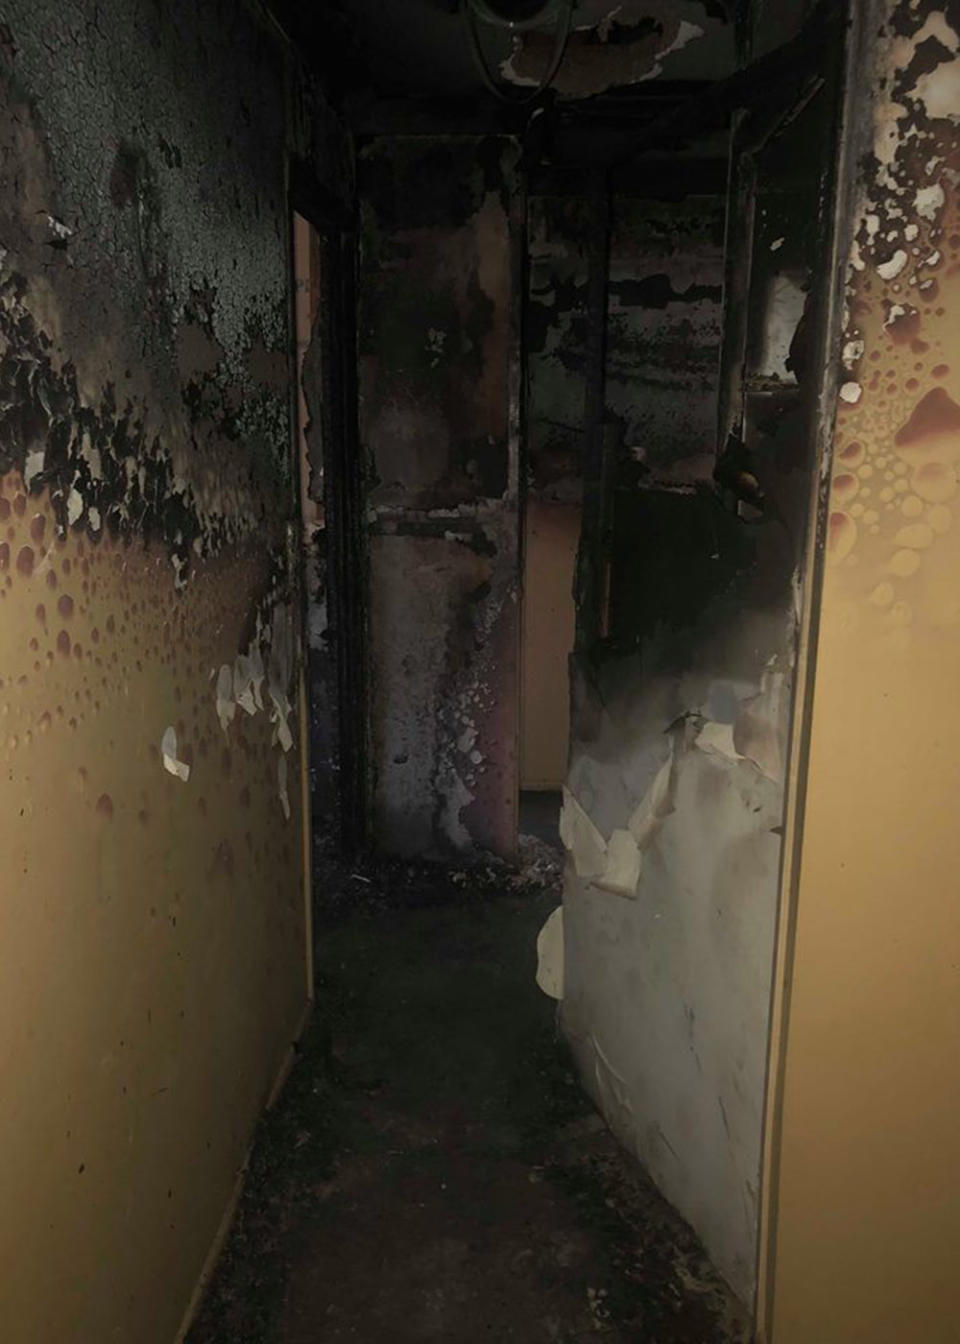 They managed to salvage some items but about 90 per cent of the family’s belongings were destroyed in the fire. Source: Supplied